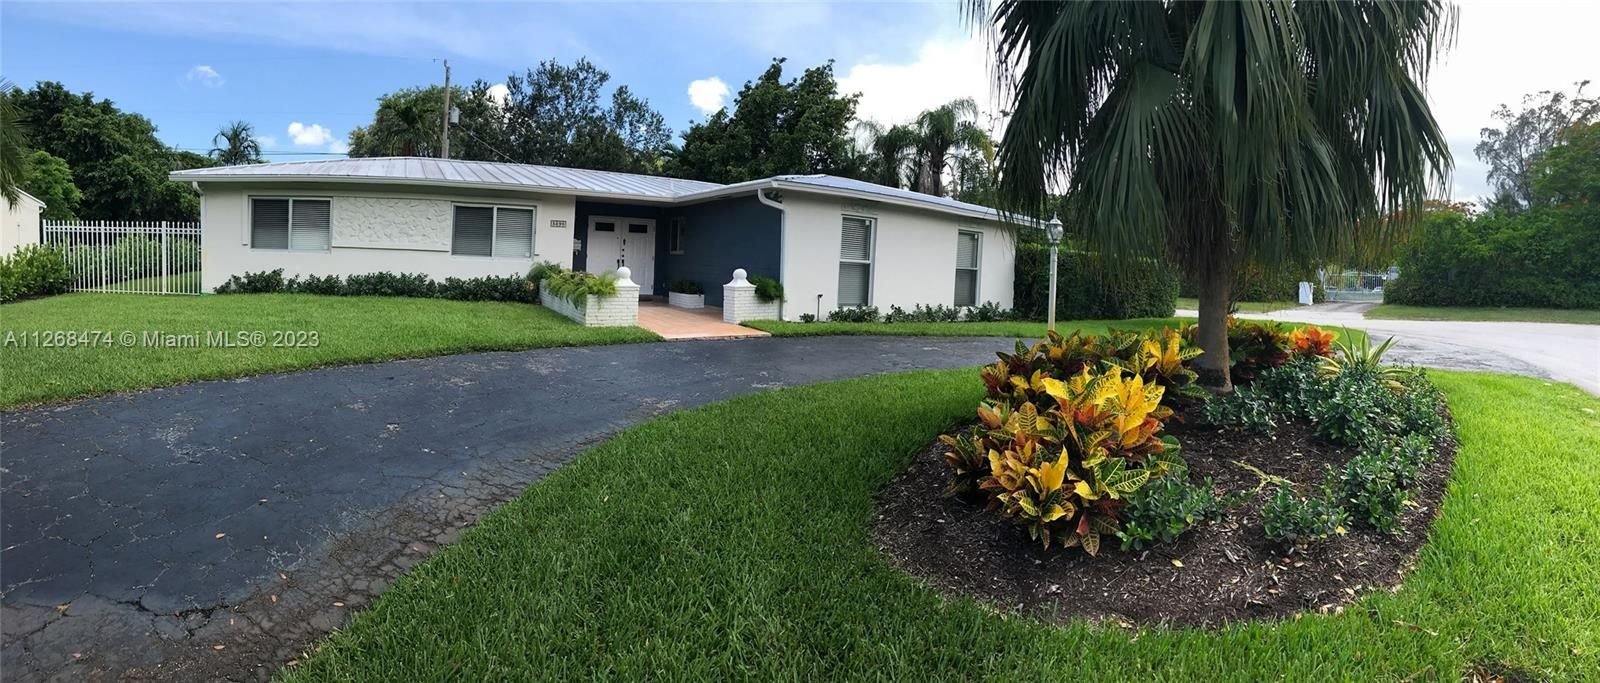 Real estate property located at 5890 51st Ter, Miami-Dade County, Miami, FL